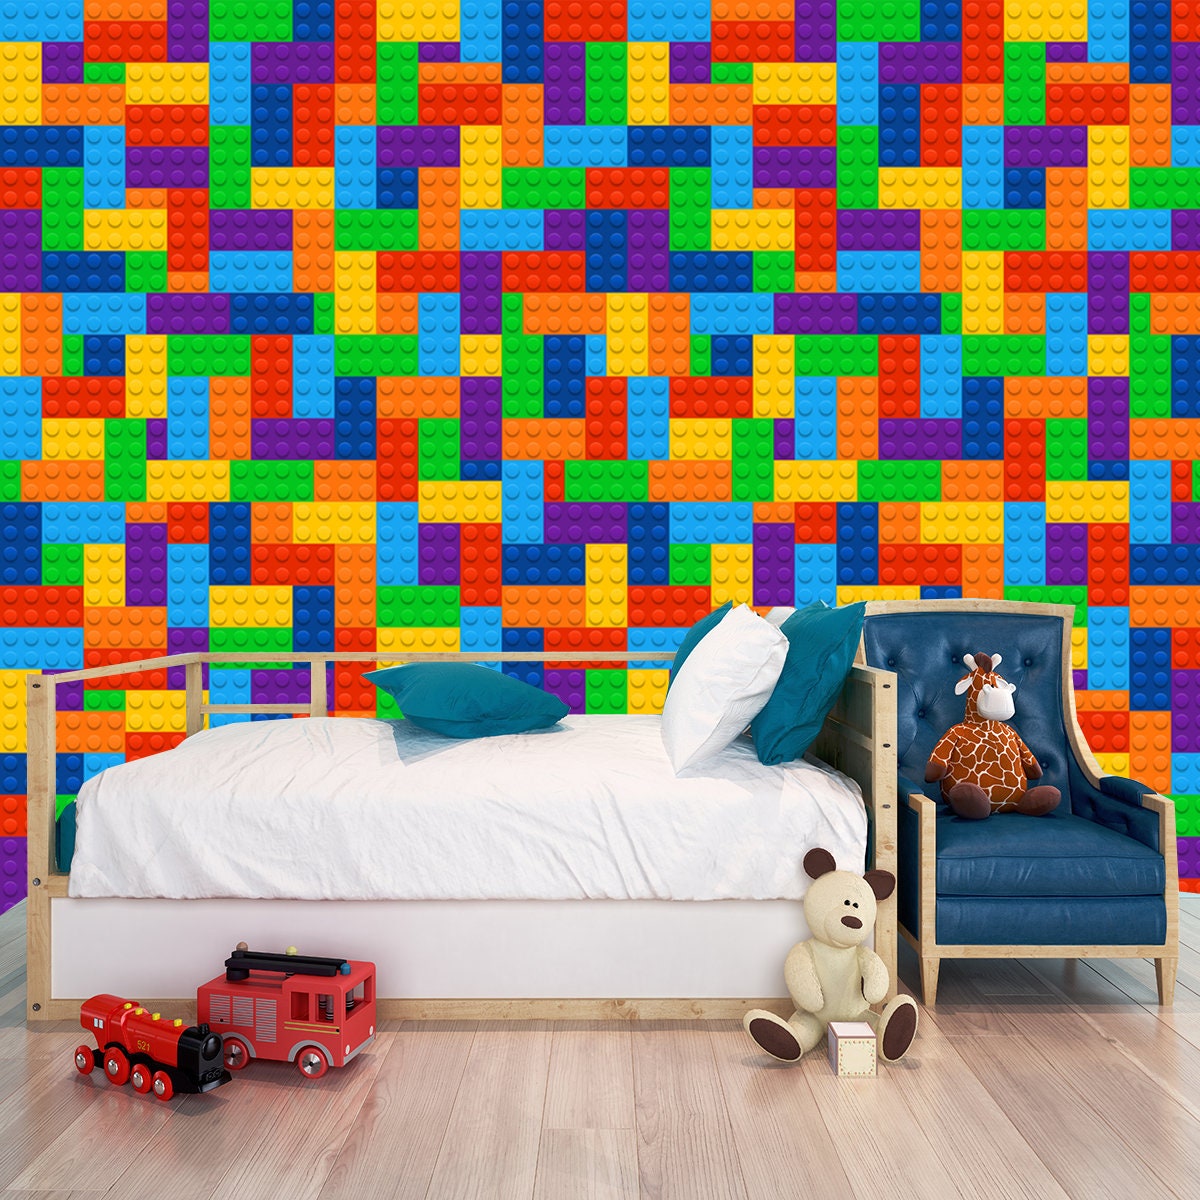 Background with Toys of Construction/Building Blocks Wallpaper Boys Bedroom Mural